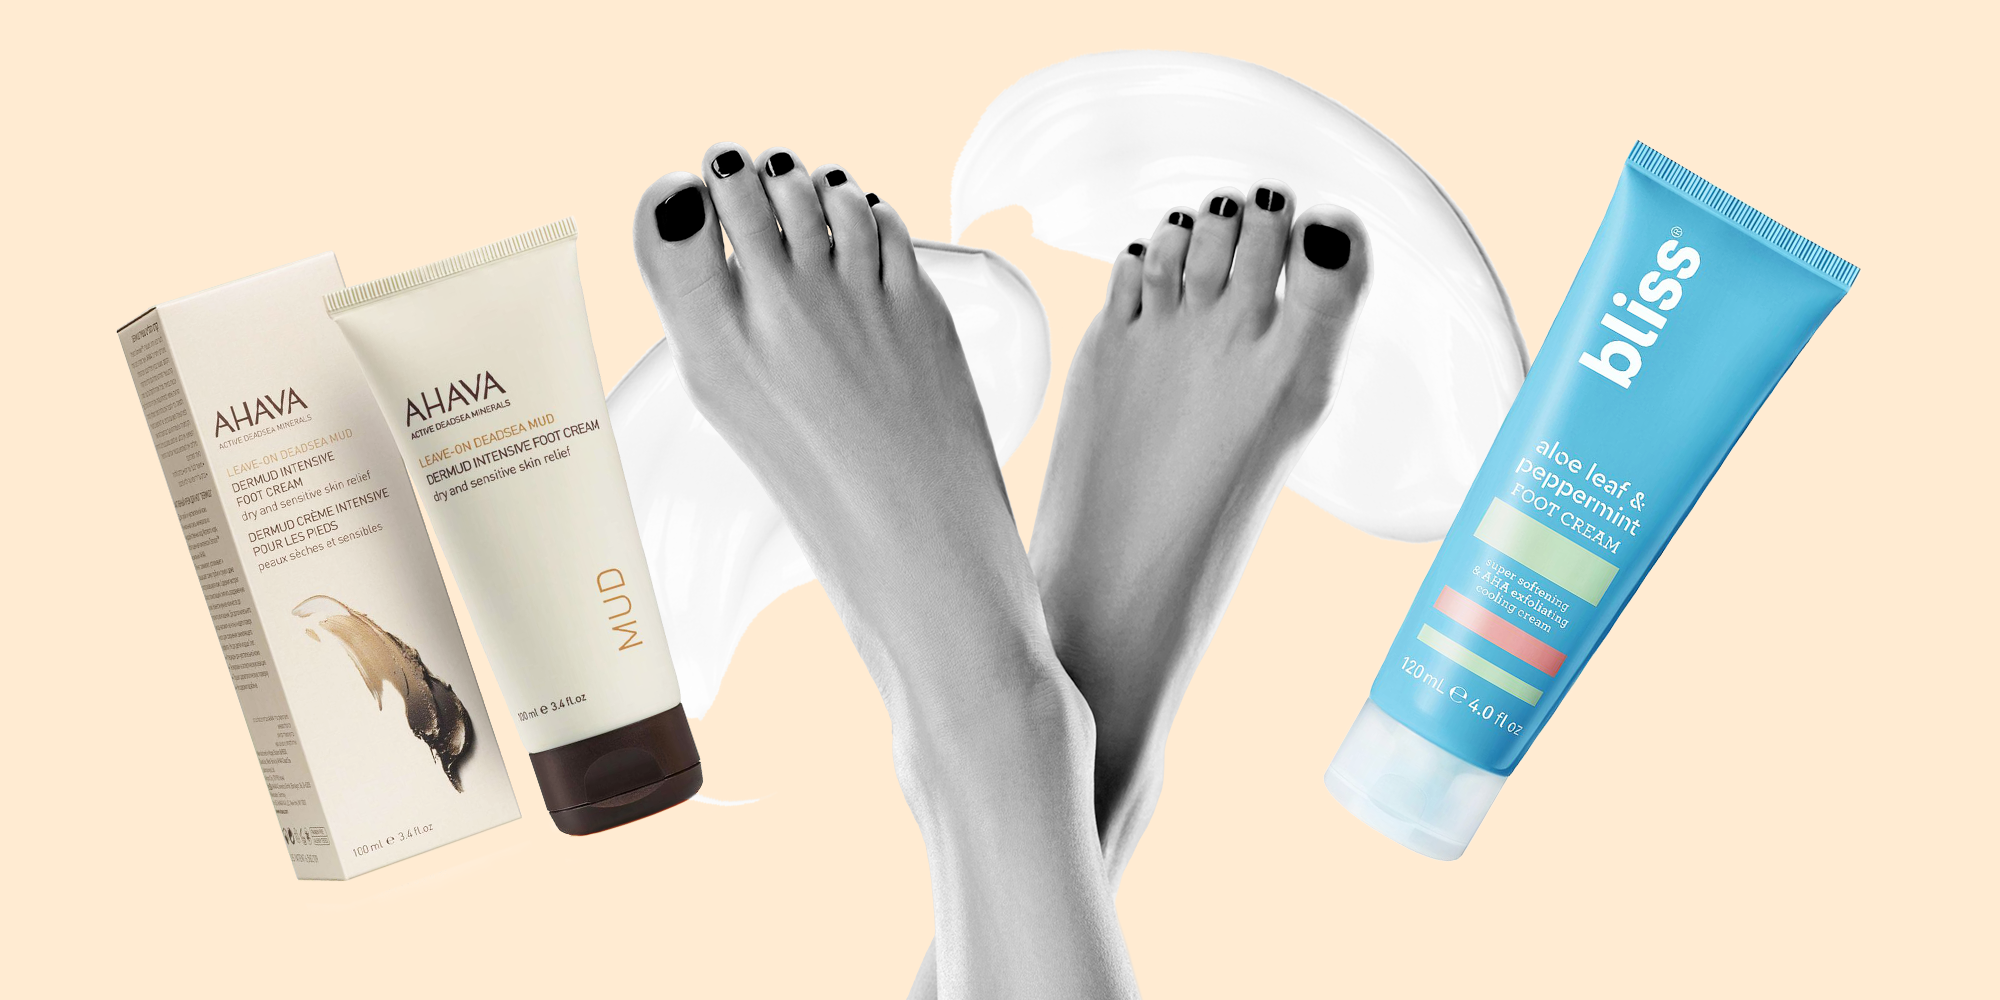 12 best products to remove hard skin on feet | Shop now in the Black Friday  sale